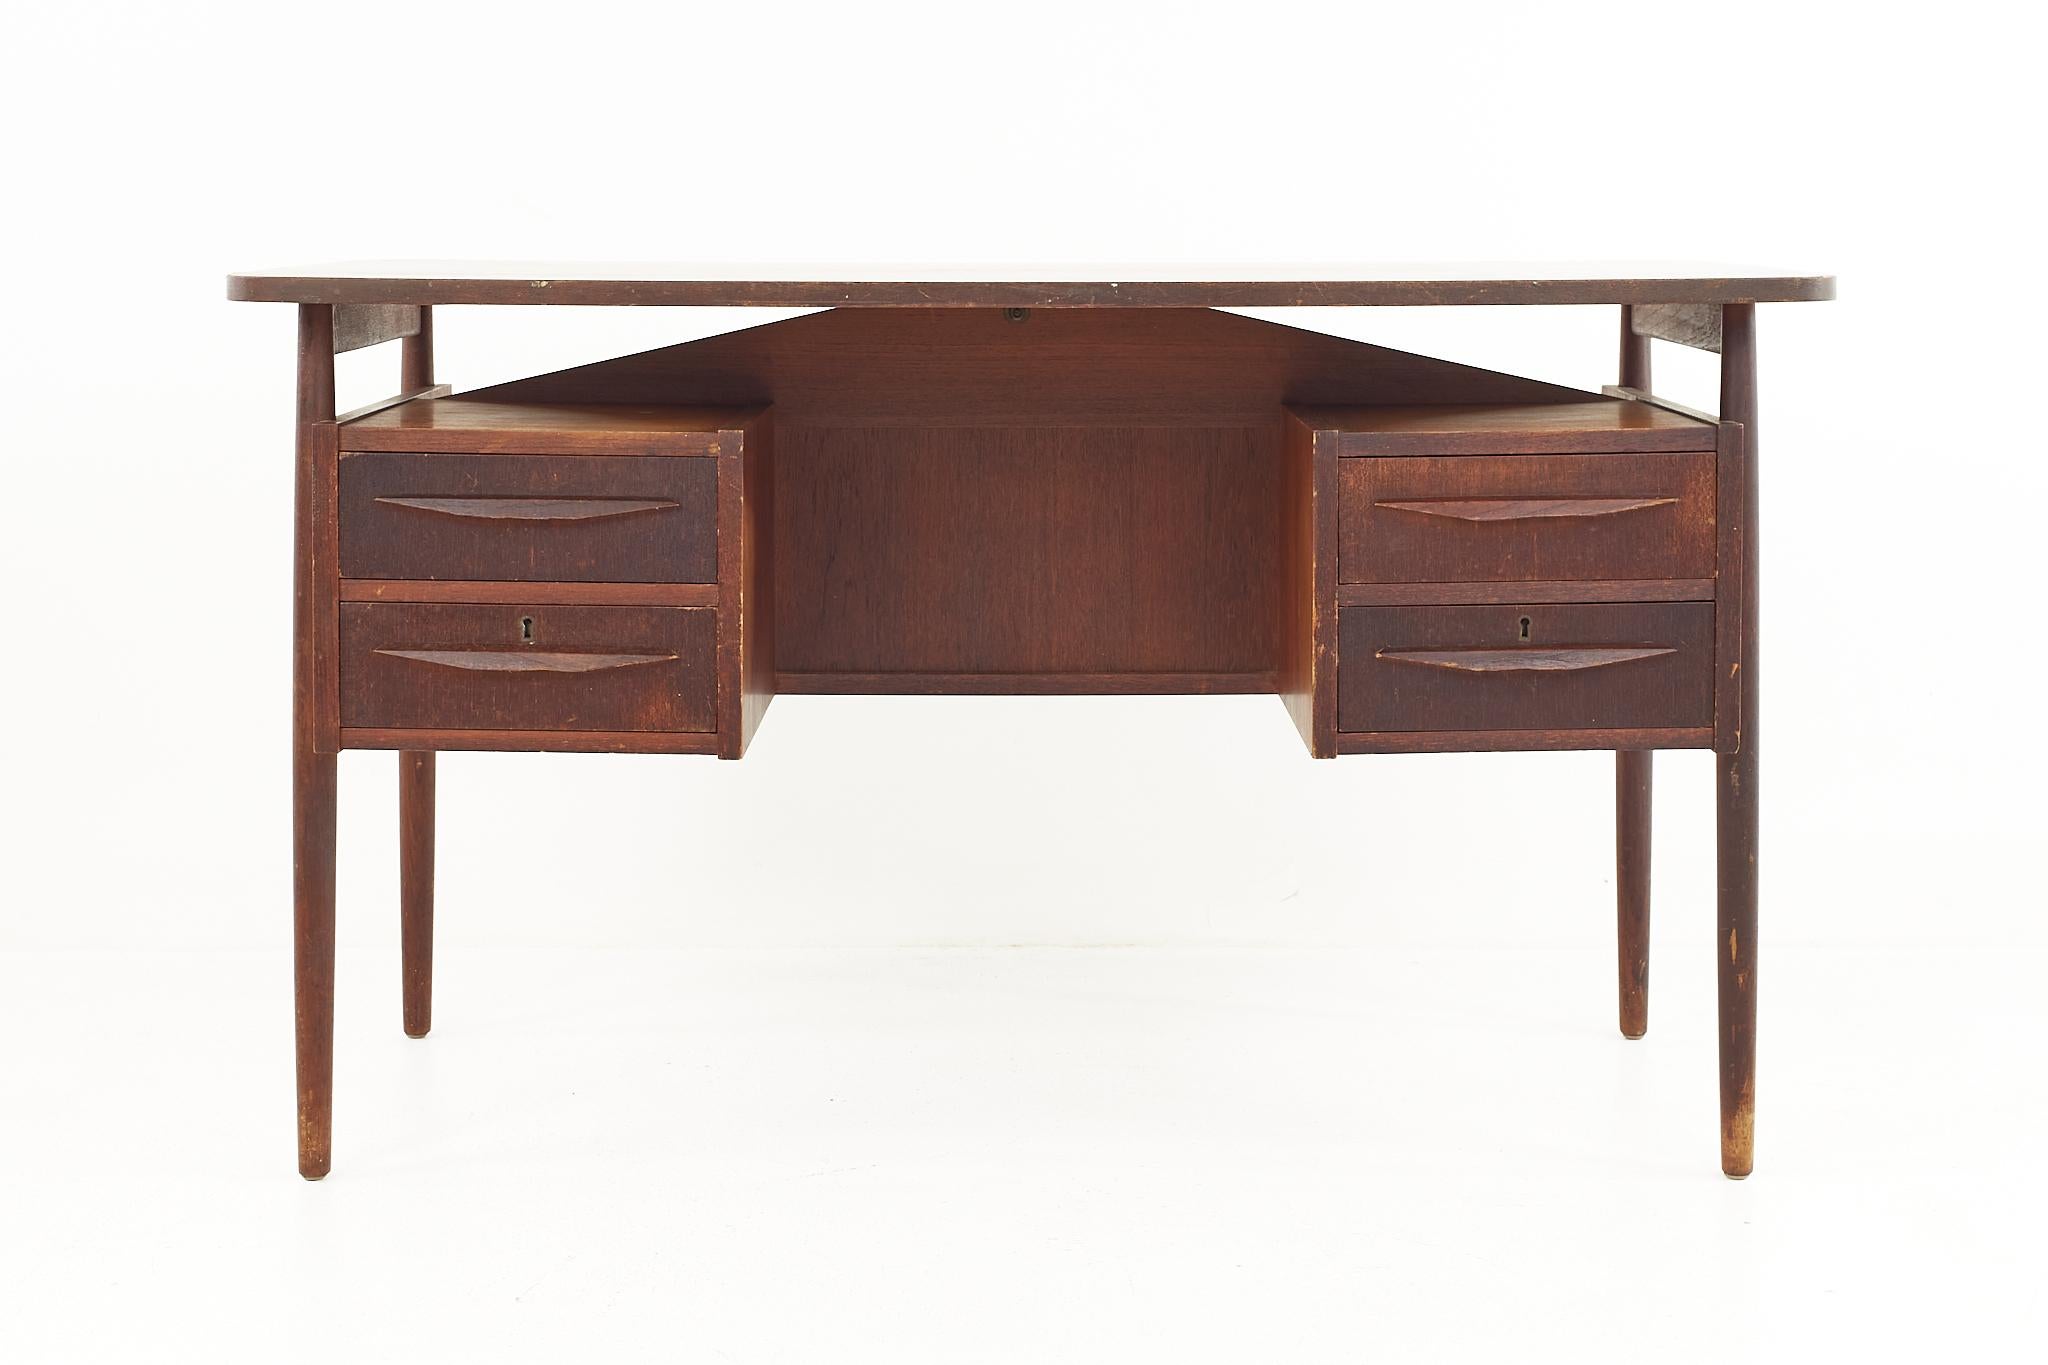 Maurice Villency mid-century floating teak executive desk

The desk measures: 51 wide x 26.5 deep x 29 high, with a chair clearance of 27.75 inches 

All pieces of furniture can be had in what we call restored vintage condition. That means the